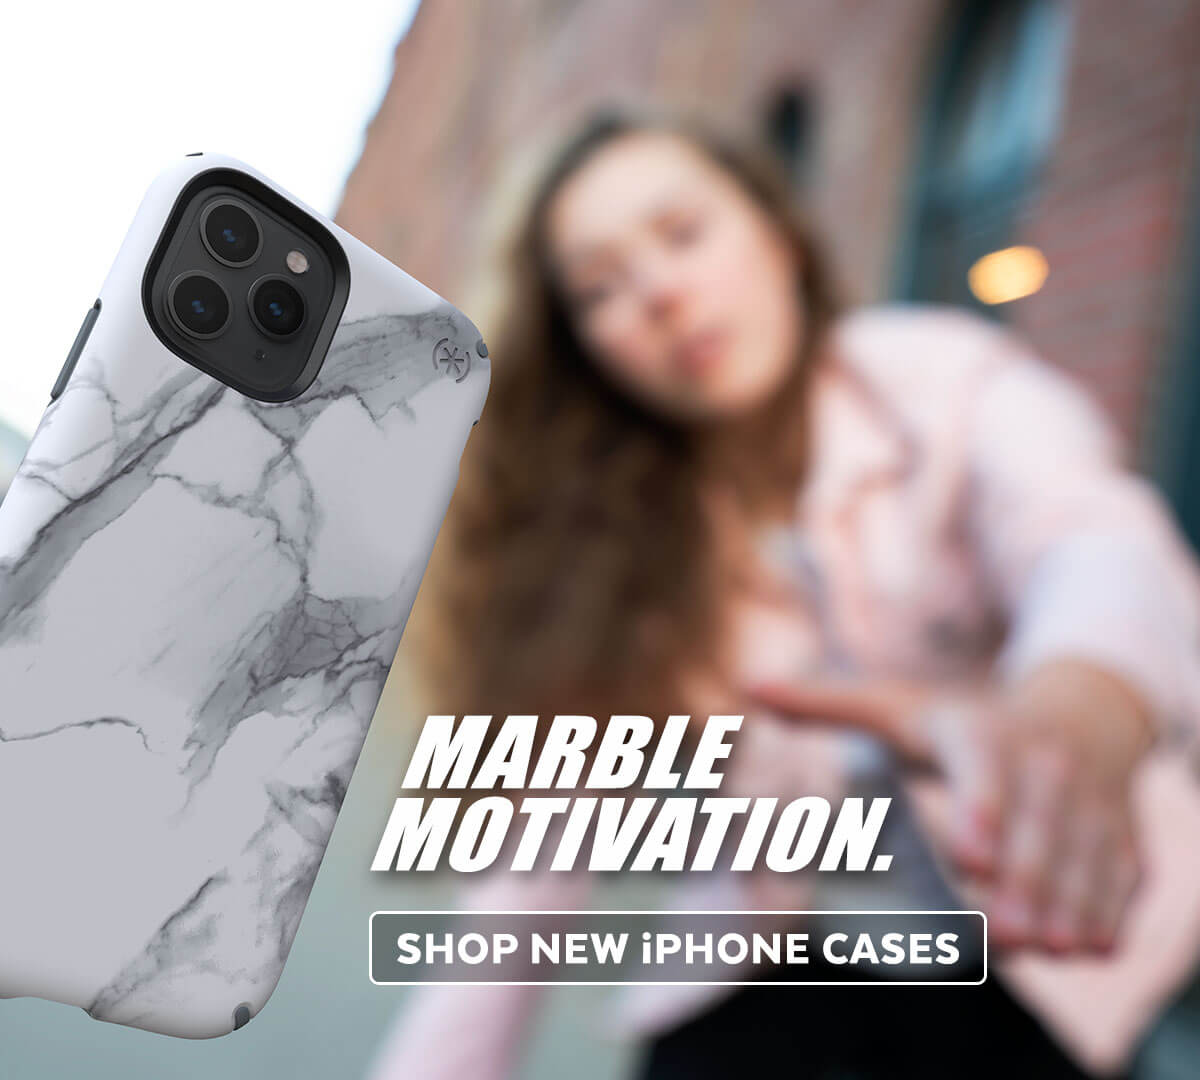 Marble Motivation. Shop new iPhone cases.